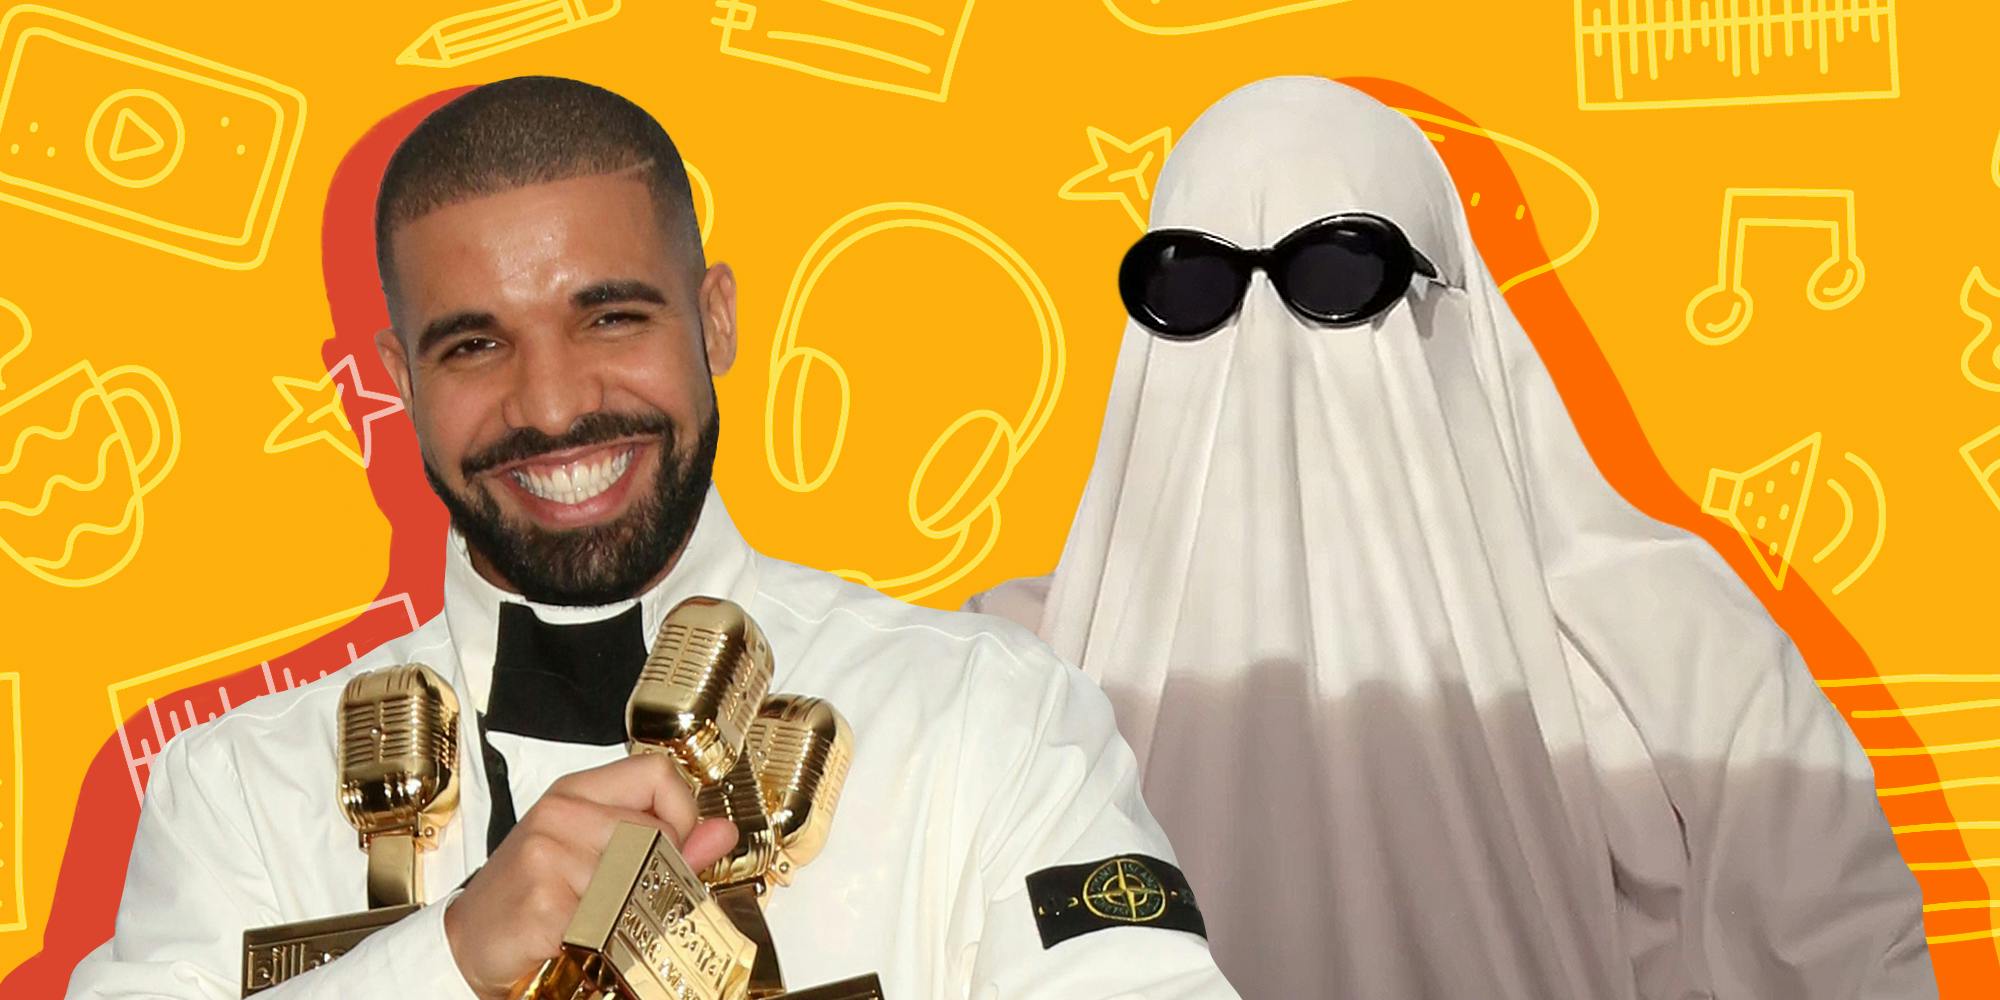 ‘I hope the major labels are feeling pressure’: The ‘Fake Drake’ song and the future of AI-generated creativity